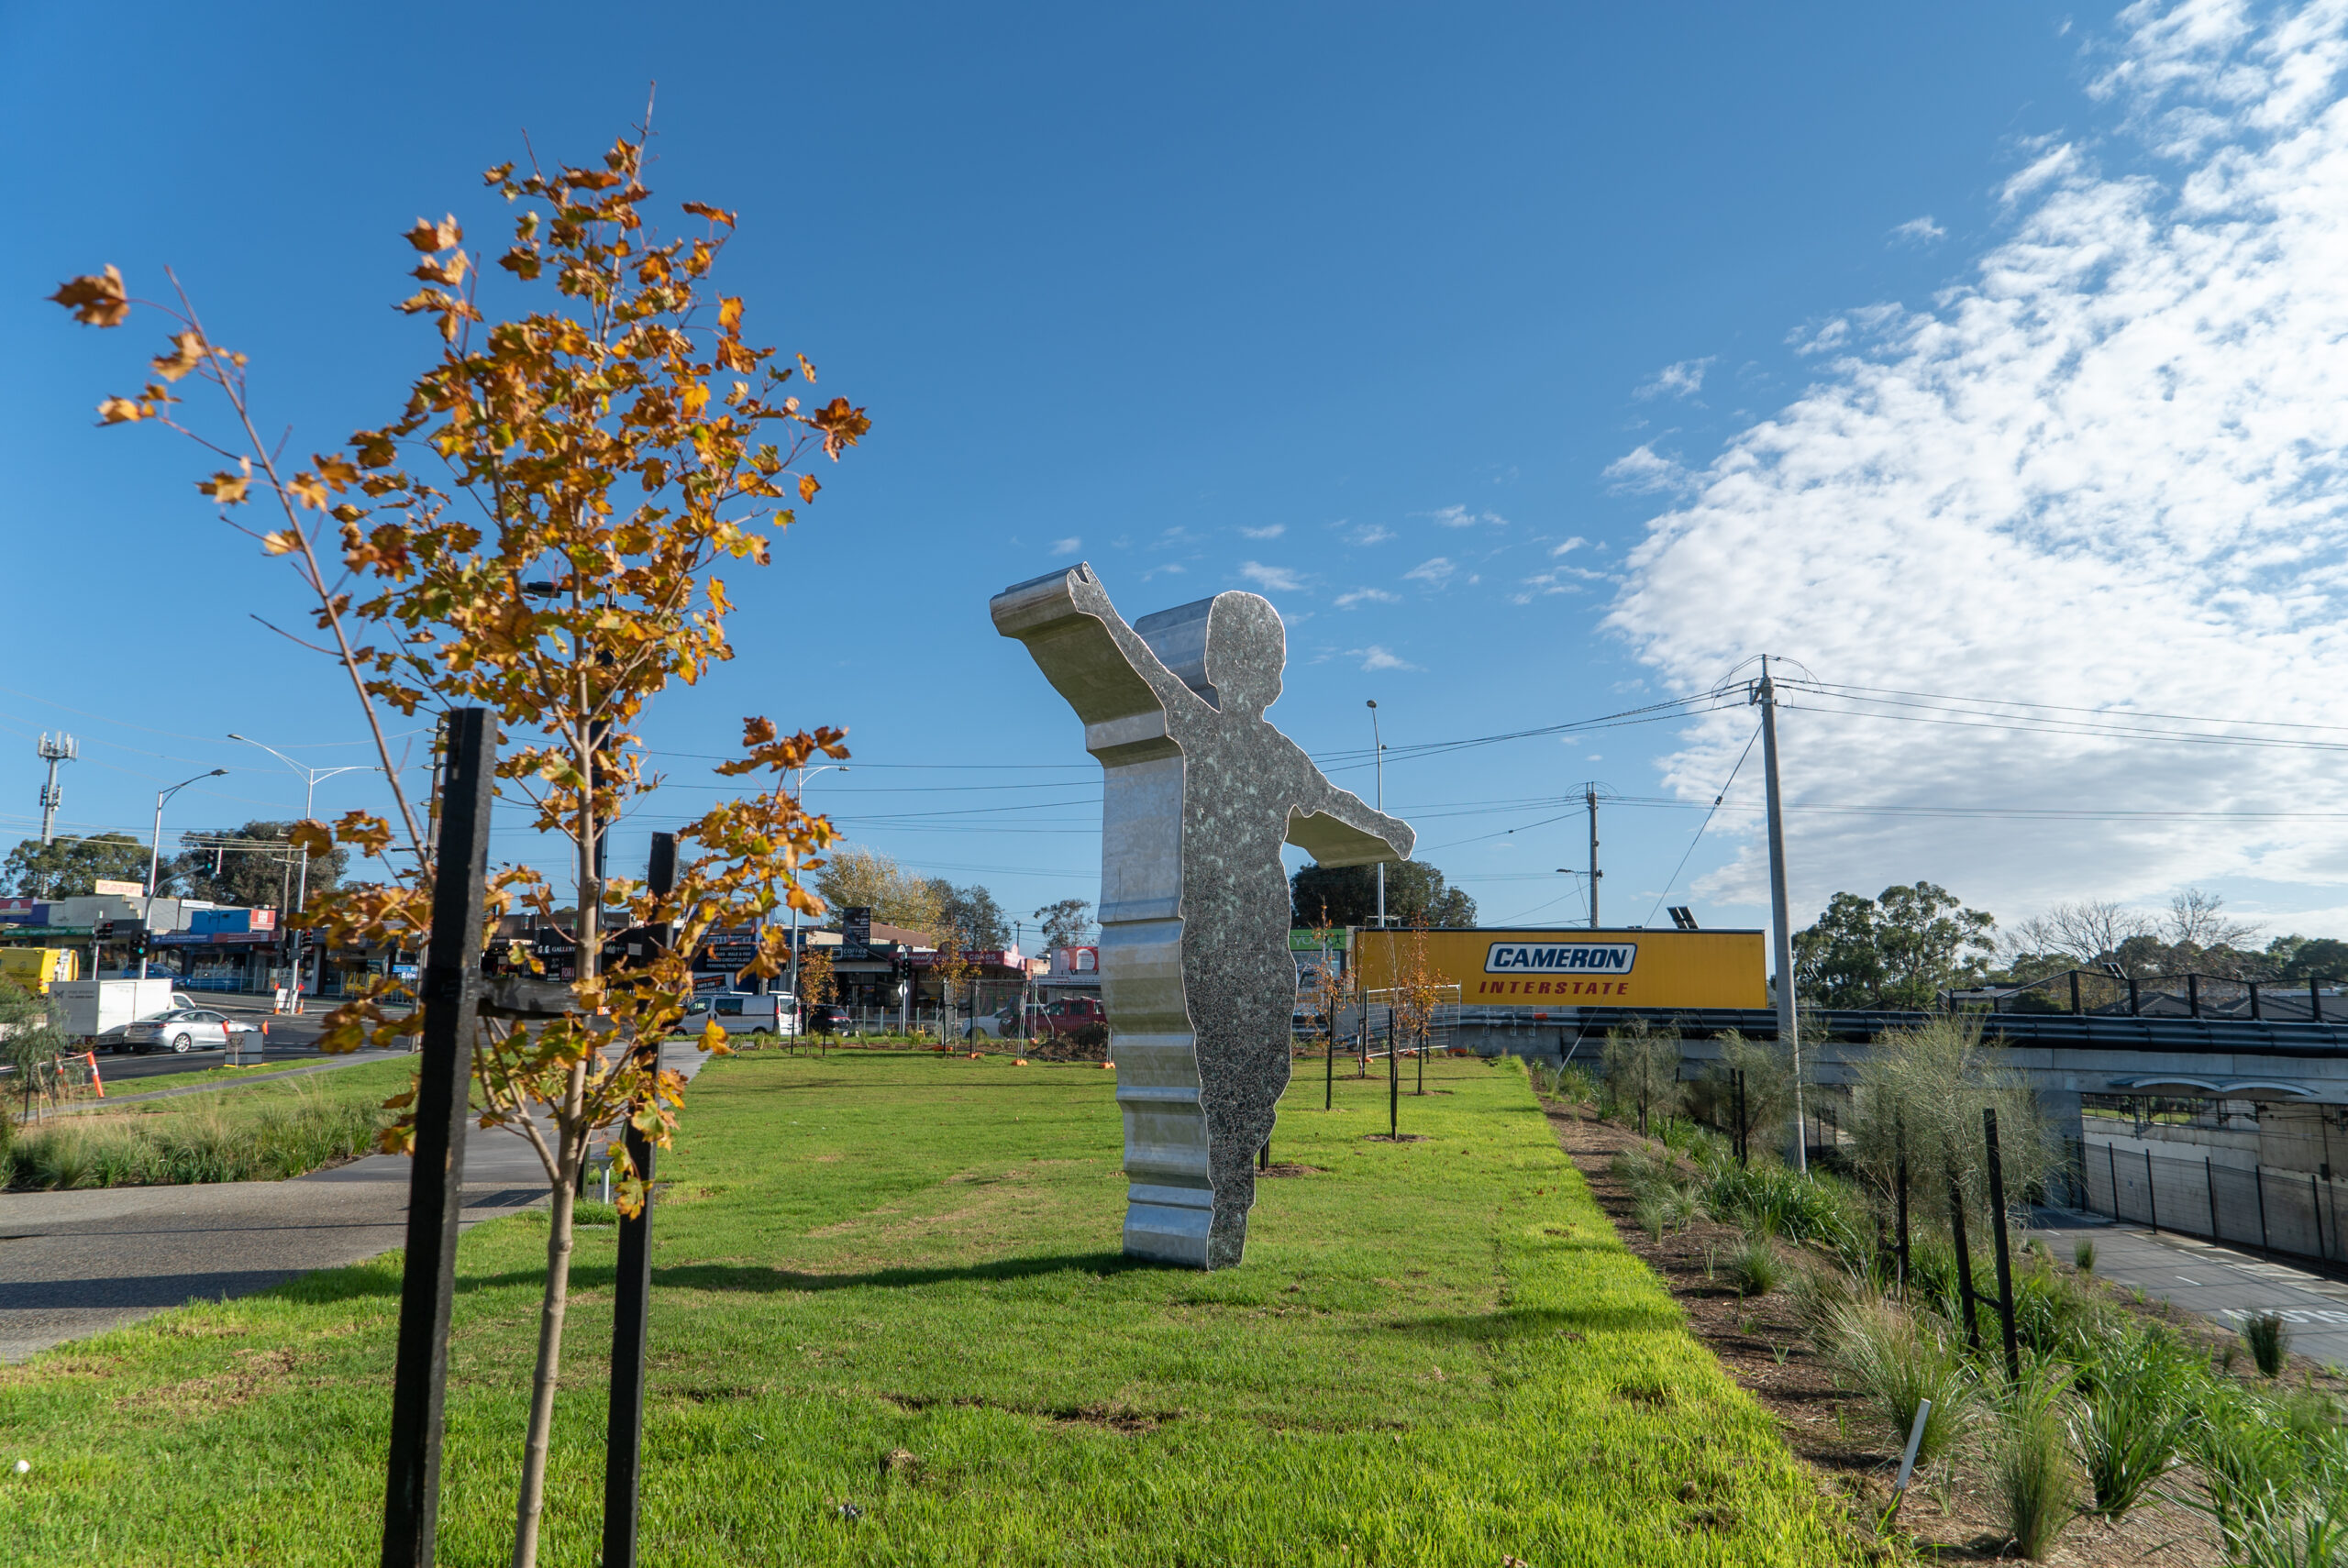 A picture of the Aeroplane art installation at Bayswater Train Station